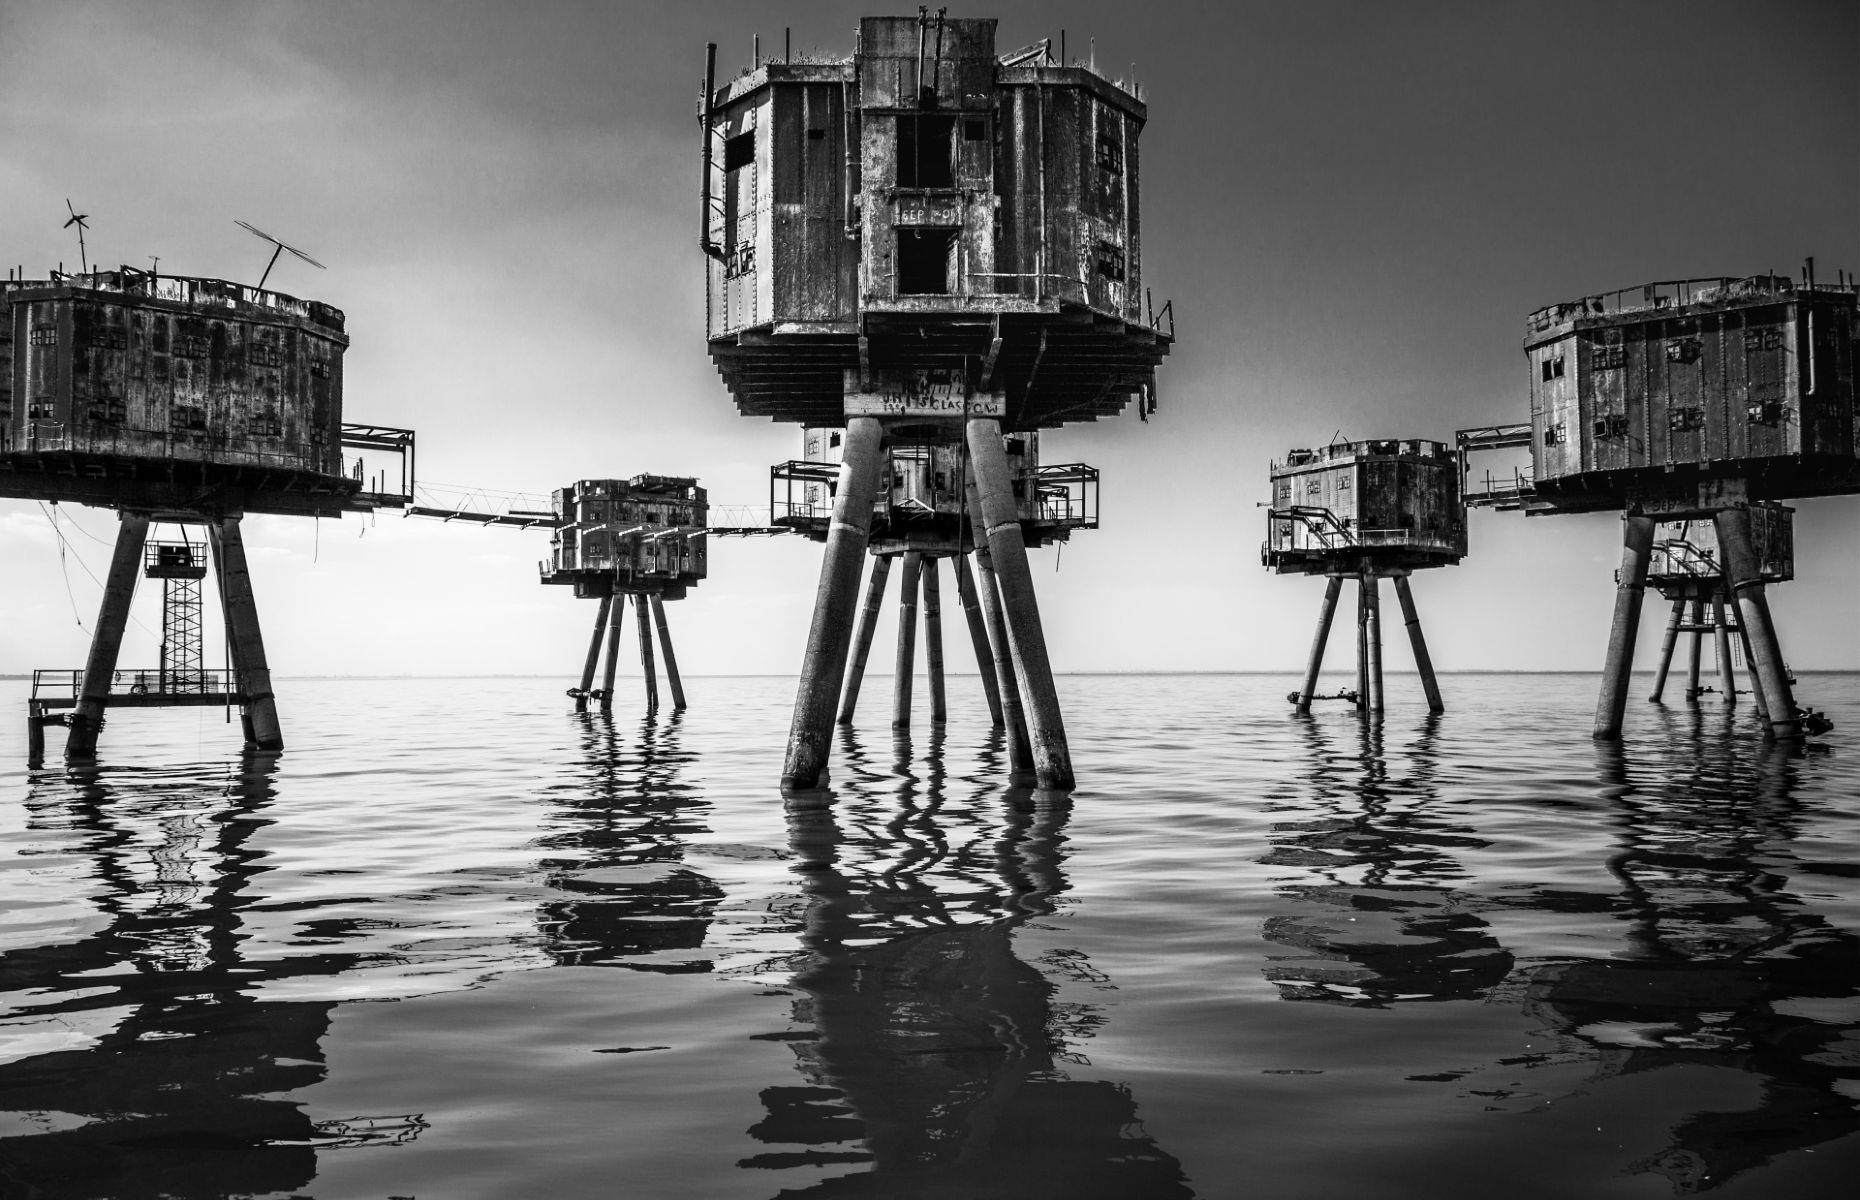 Constructed during the Second World War between 1942 and 1943, the Maunsell Fort at Whitstable in Kent is considered one of the most complete army-commissioned sea forts that remains in the UK. Judge Rich Payne described this image, which was captured by George Fisk, as "striking", adding that "the towers look other-worldly, like props from some long-forgotten sci-fi film."